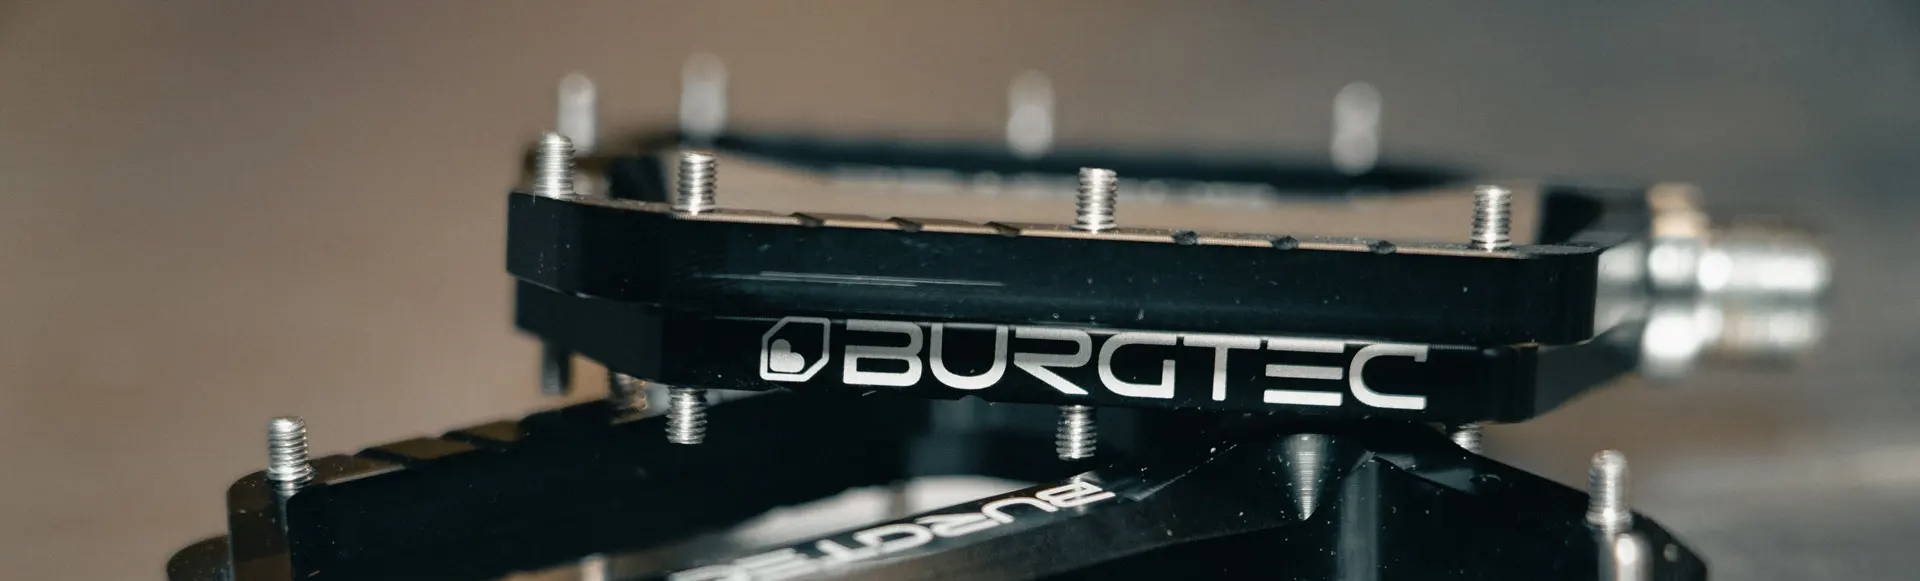 Burgtec Penthouse MK5 Black MTB pedals stacked on each other